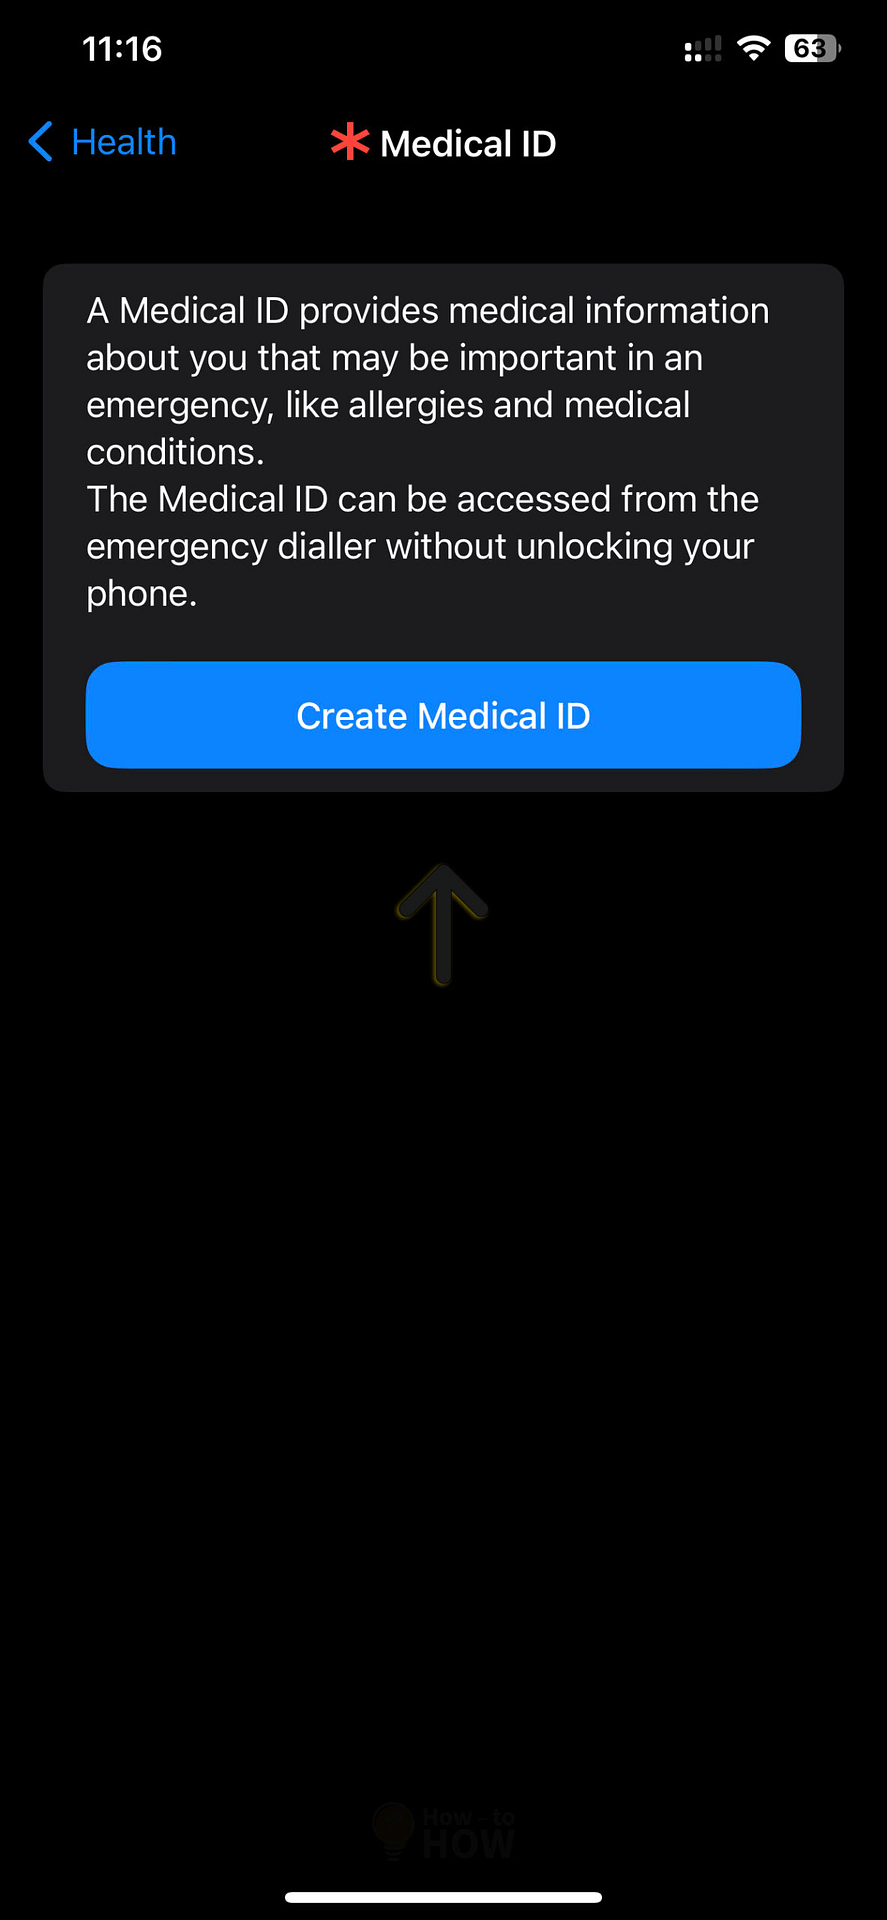 Create your Medical ID